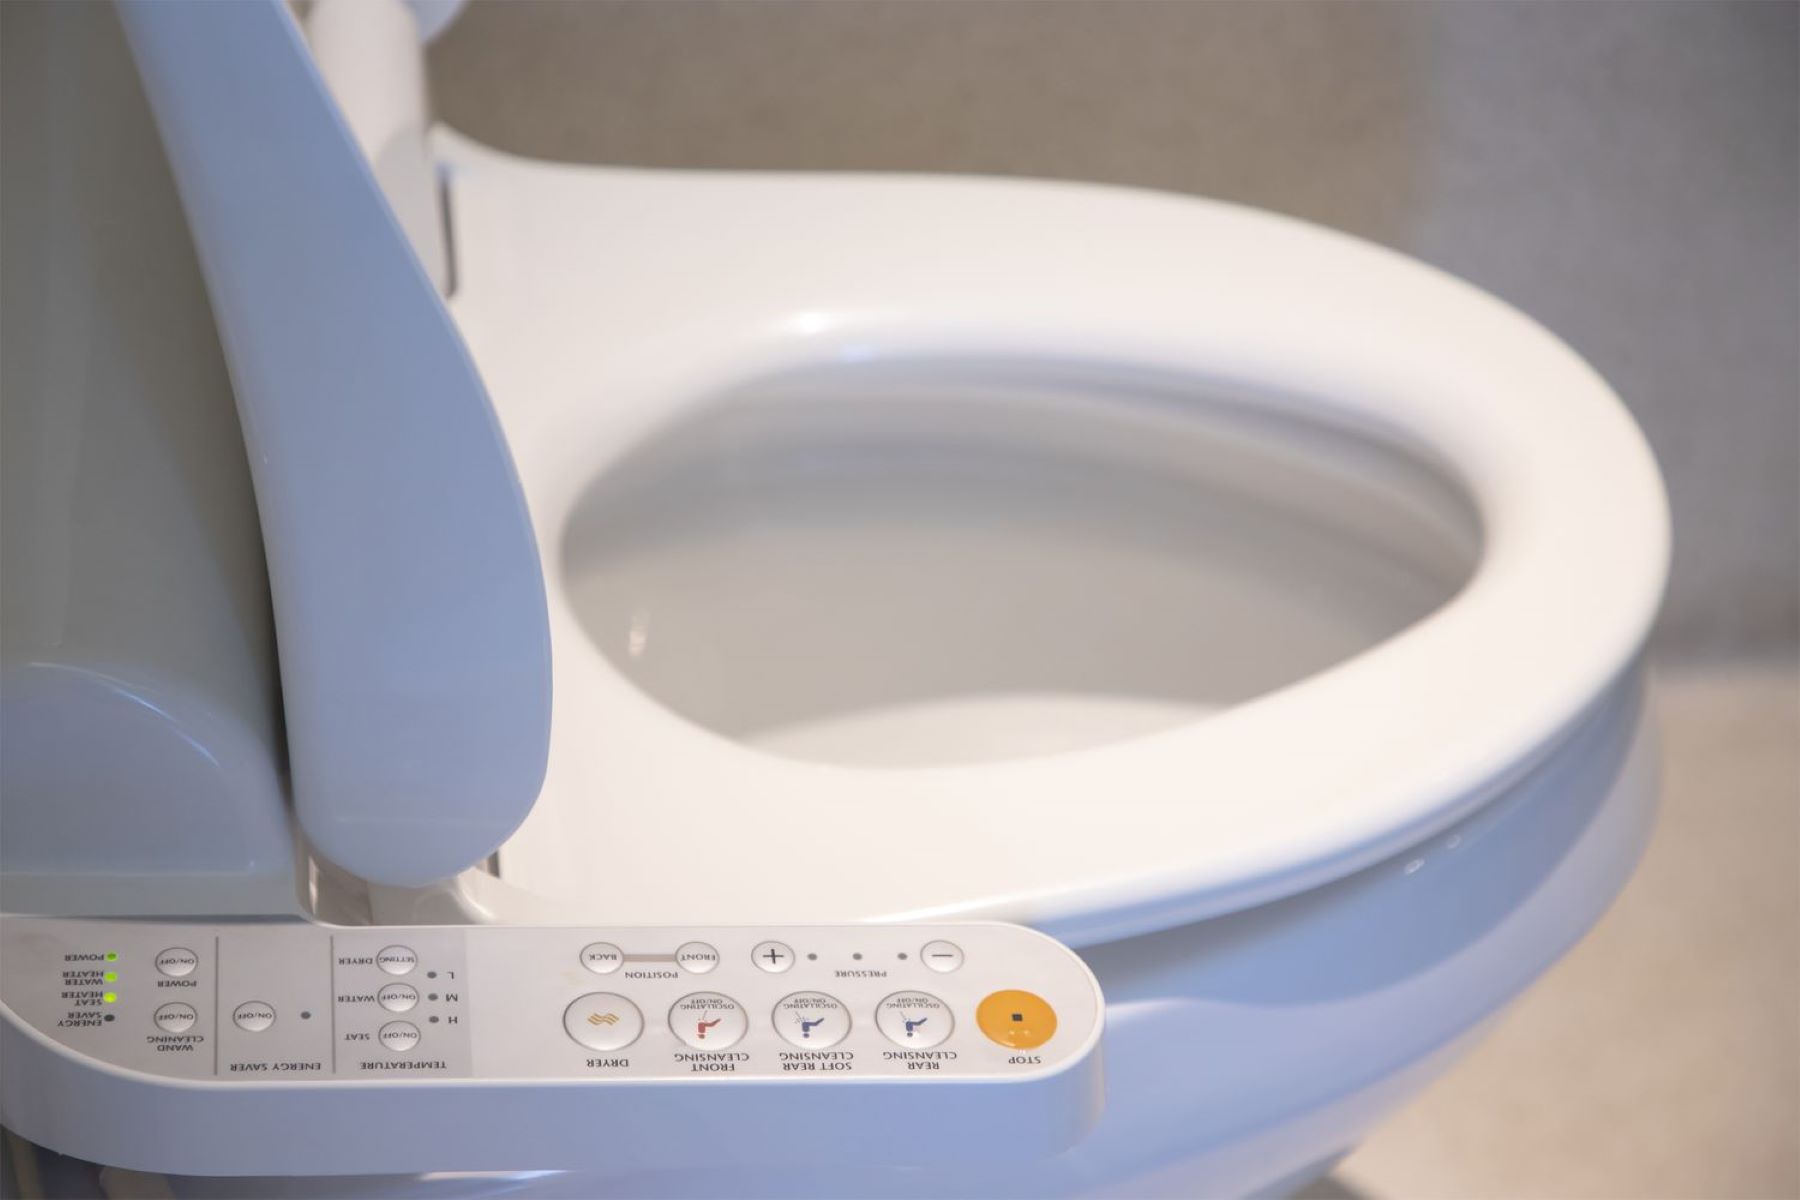 What Are The Downsides Of Using A Bidet?